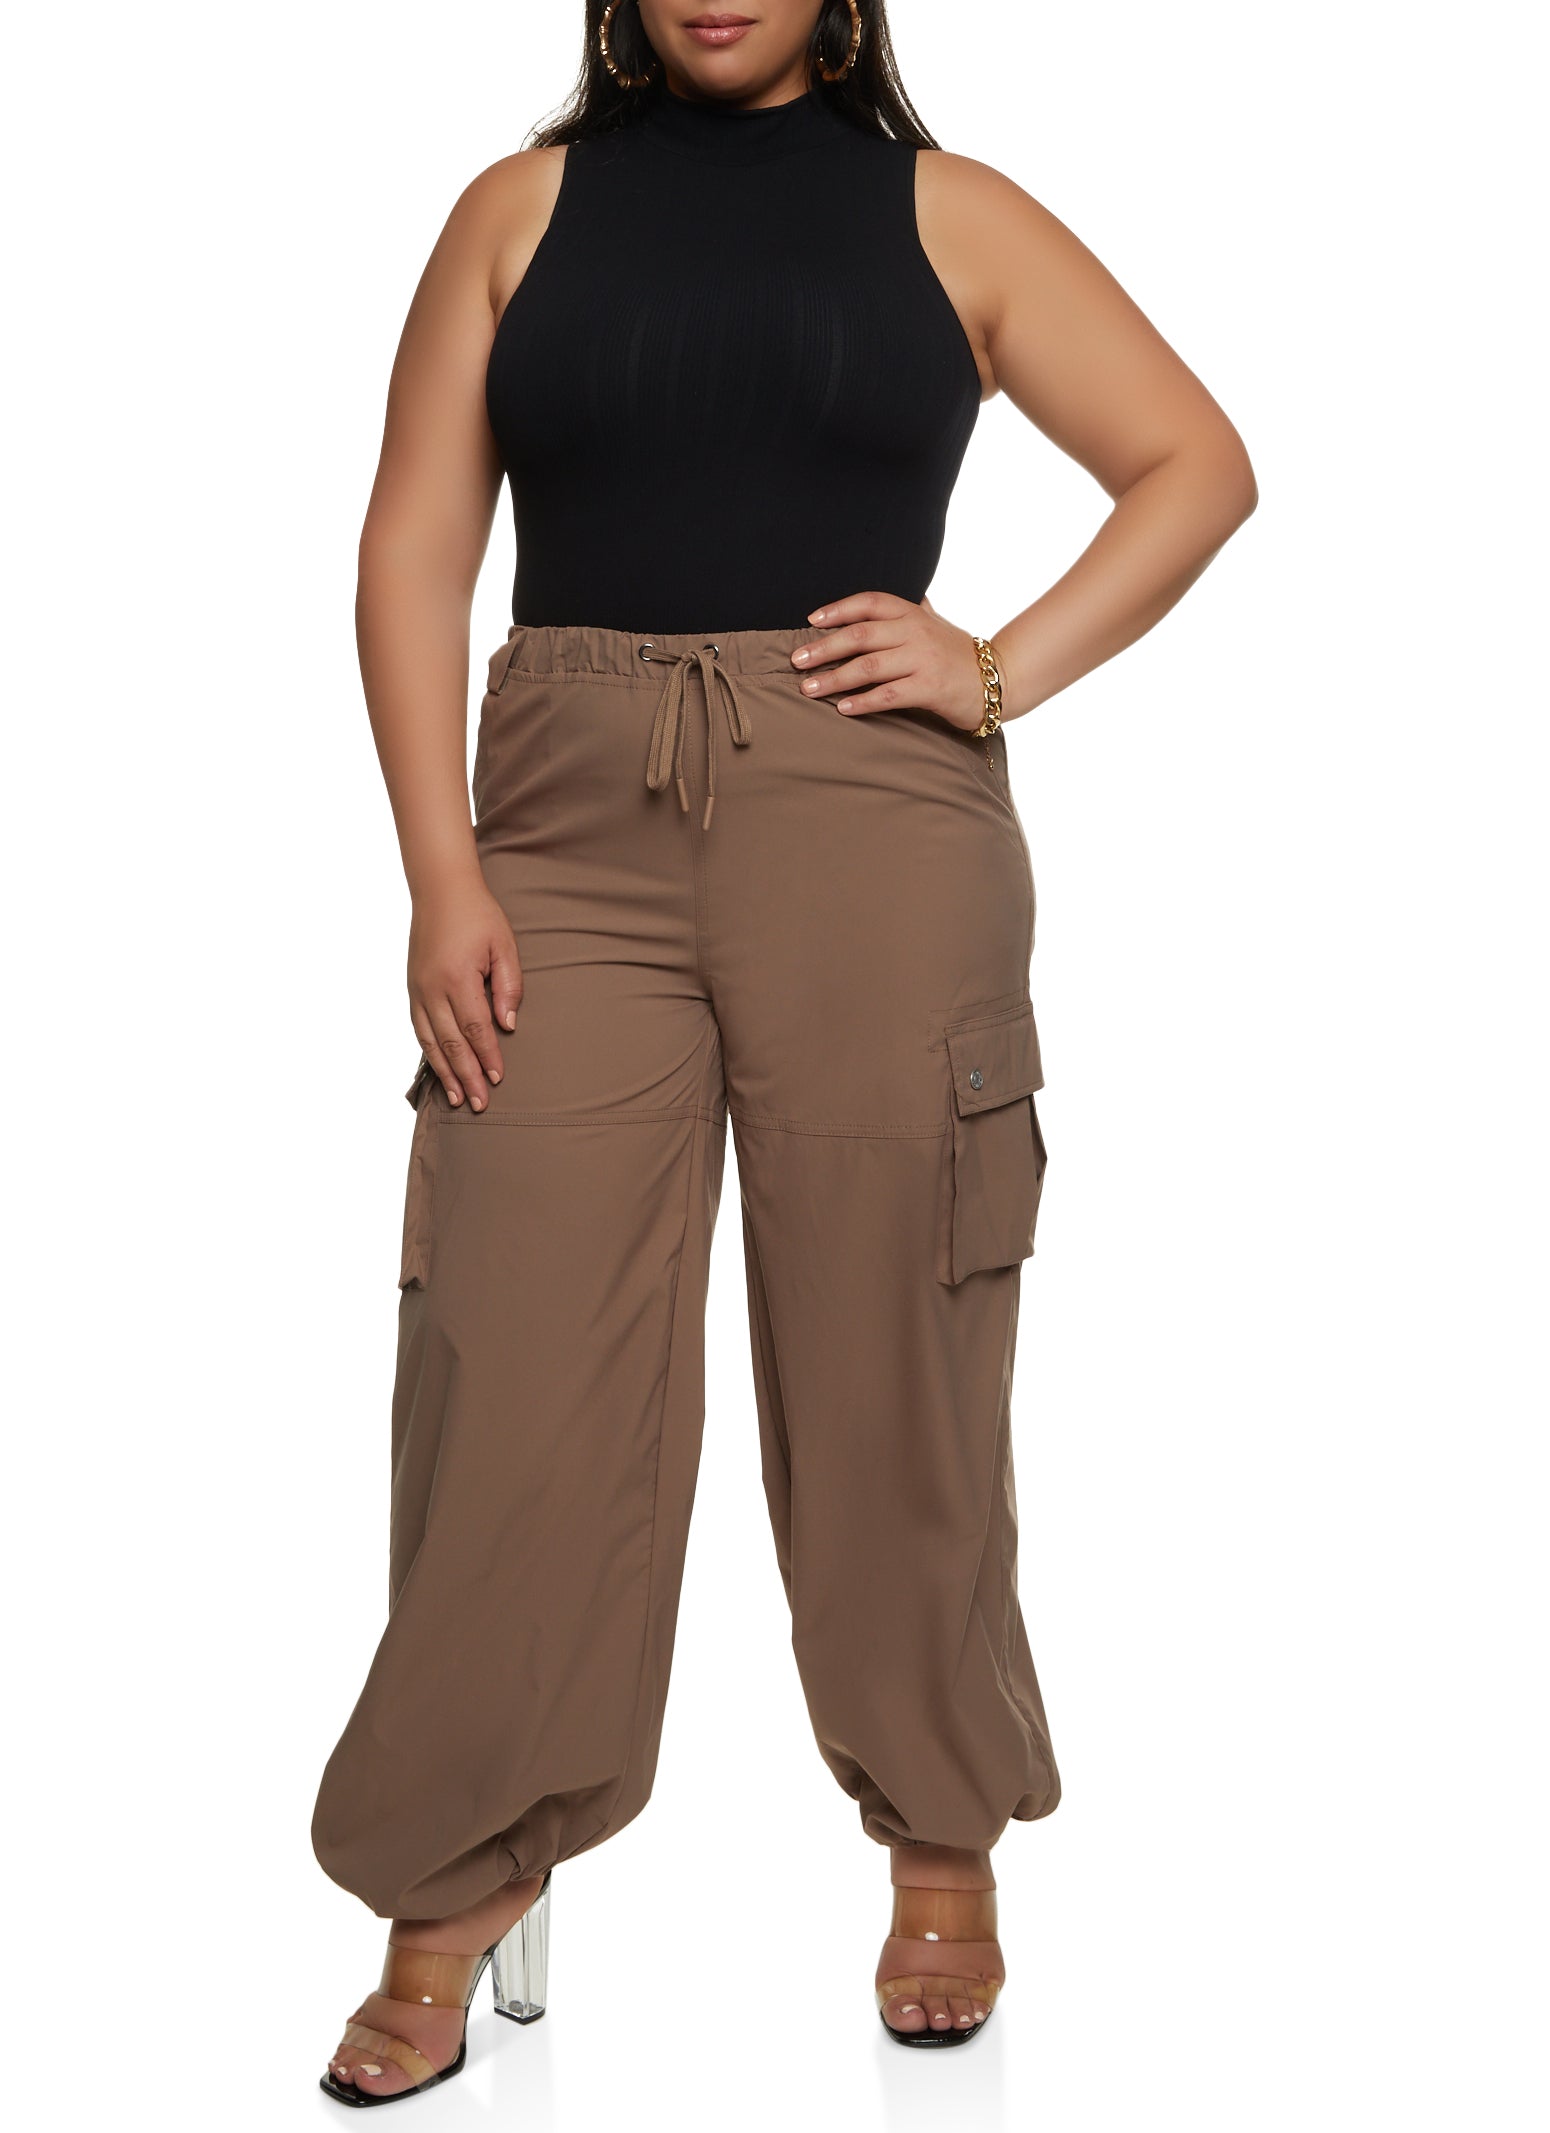 Rainbow Shops Womens Plus Size Solid Drawstring Waist Cargo Joggers, Brown, Size  2X